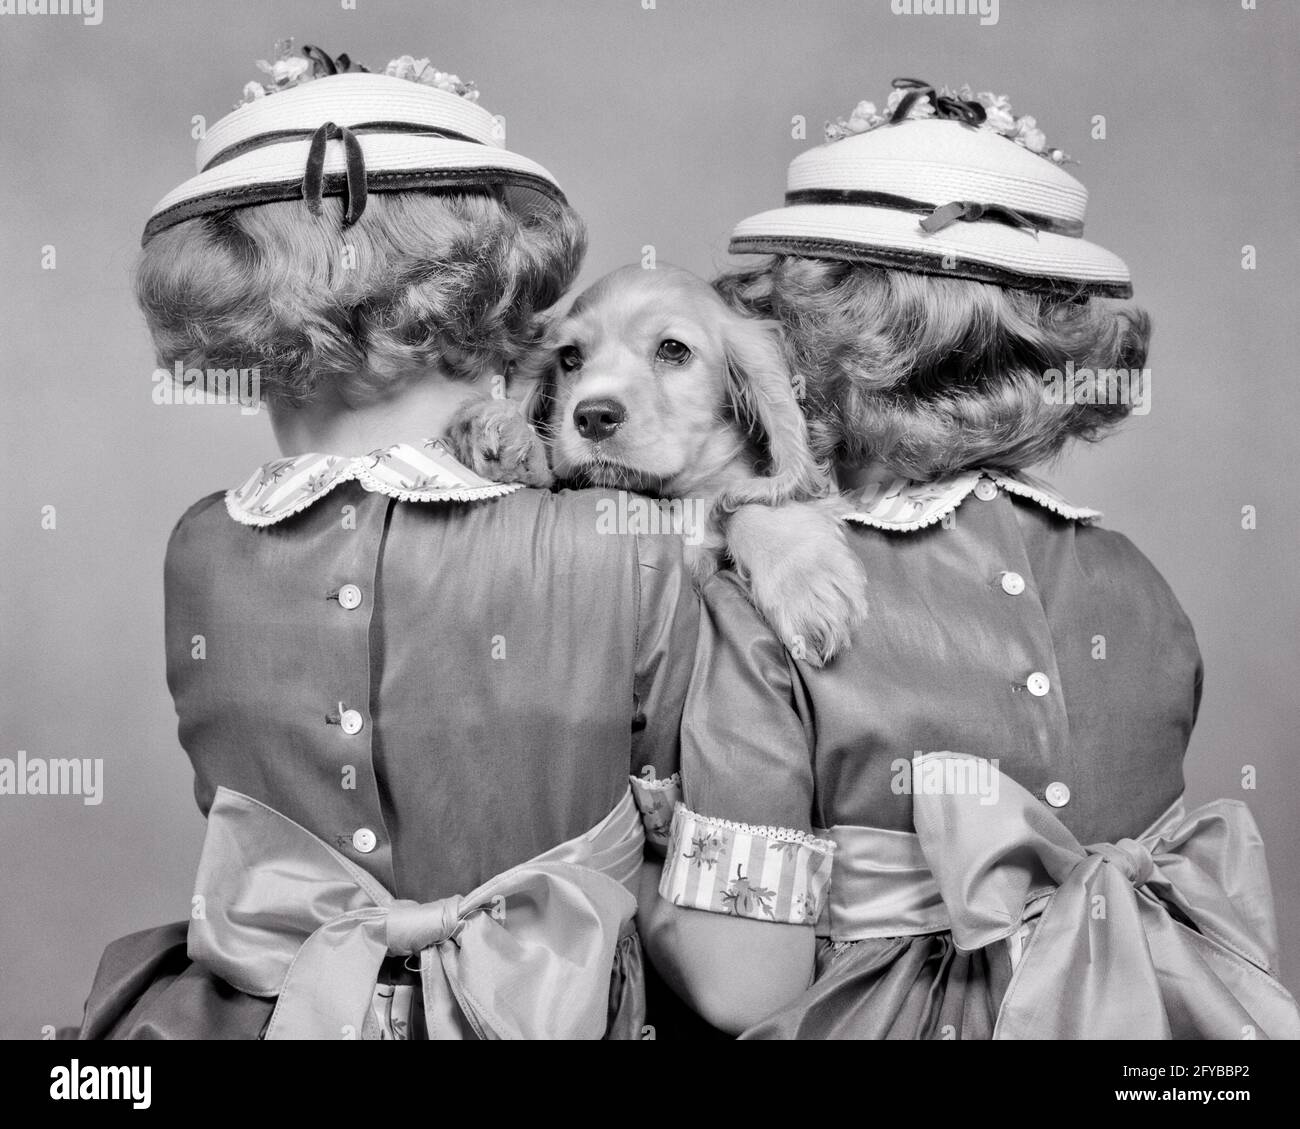 1950s TWO TWIN GIRLS BACK TO CAMERA FANCY HATS AND DRESSES HOLDING COCKER SPANIEL PUPPY LOOKING AT CAMERA BETWEEN THEM  - d2628 HAR001 HARS MATCH FANCY PETS COCKER B&W DRESSES MATCHING SAME MAMMALS AND CANINES REAR VIEW TO BETWEEN SIBLING POOCH THEM FROM BEHIND BOWS LOOK-ALIKE BACK VIEW CANINE DUPLICATE JUVENILES LOOK ALIKE MAMMAL PUP BLACK AND WHITE CAUCASIAN ETHNICITY HAR001 OLD FASHIONED Stock Photo